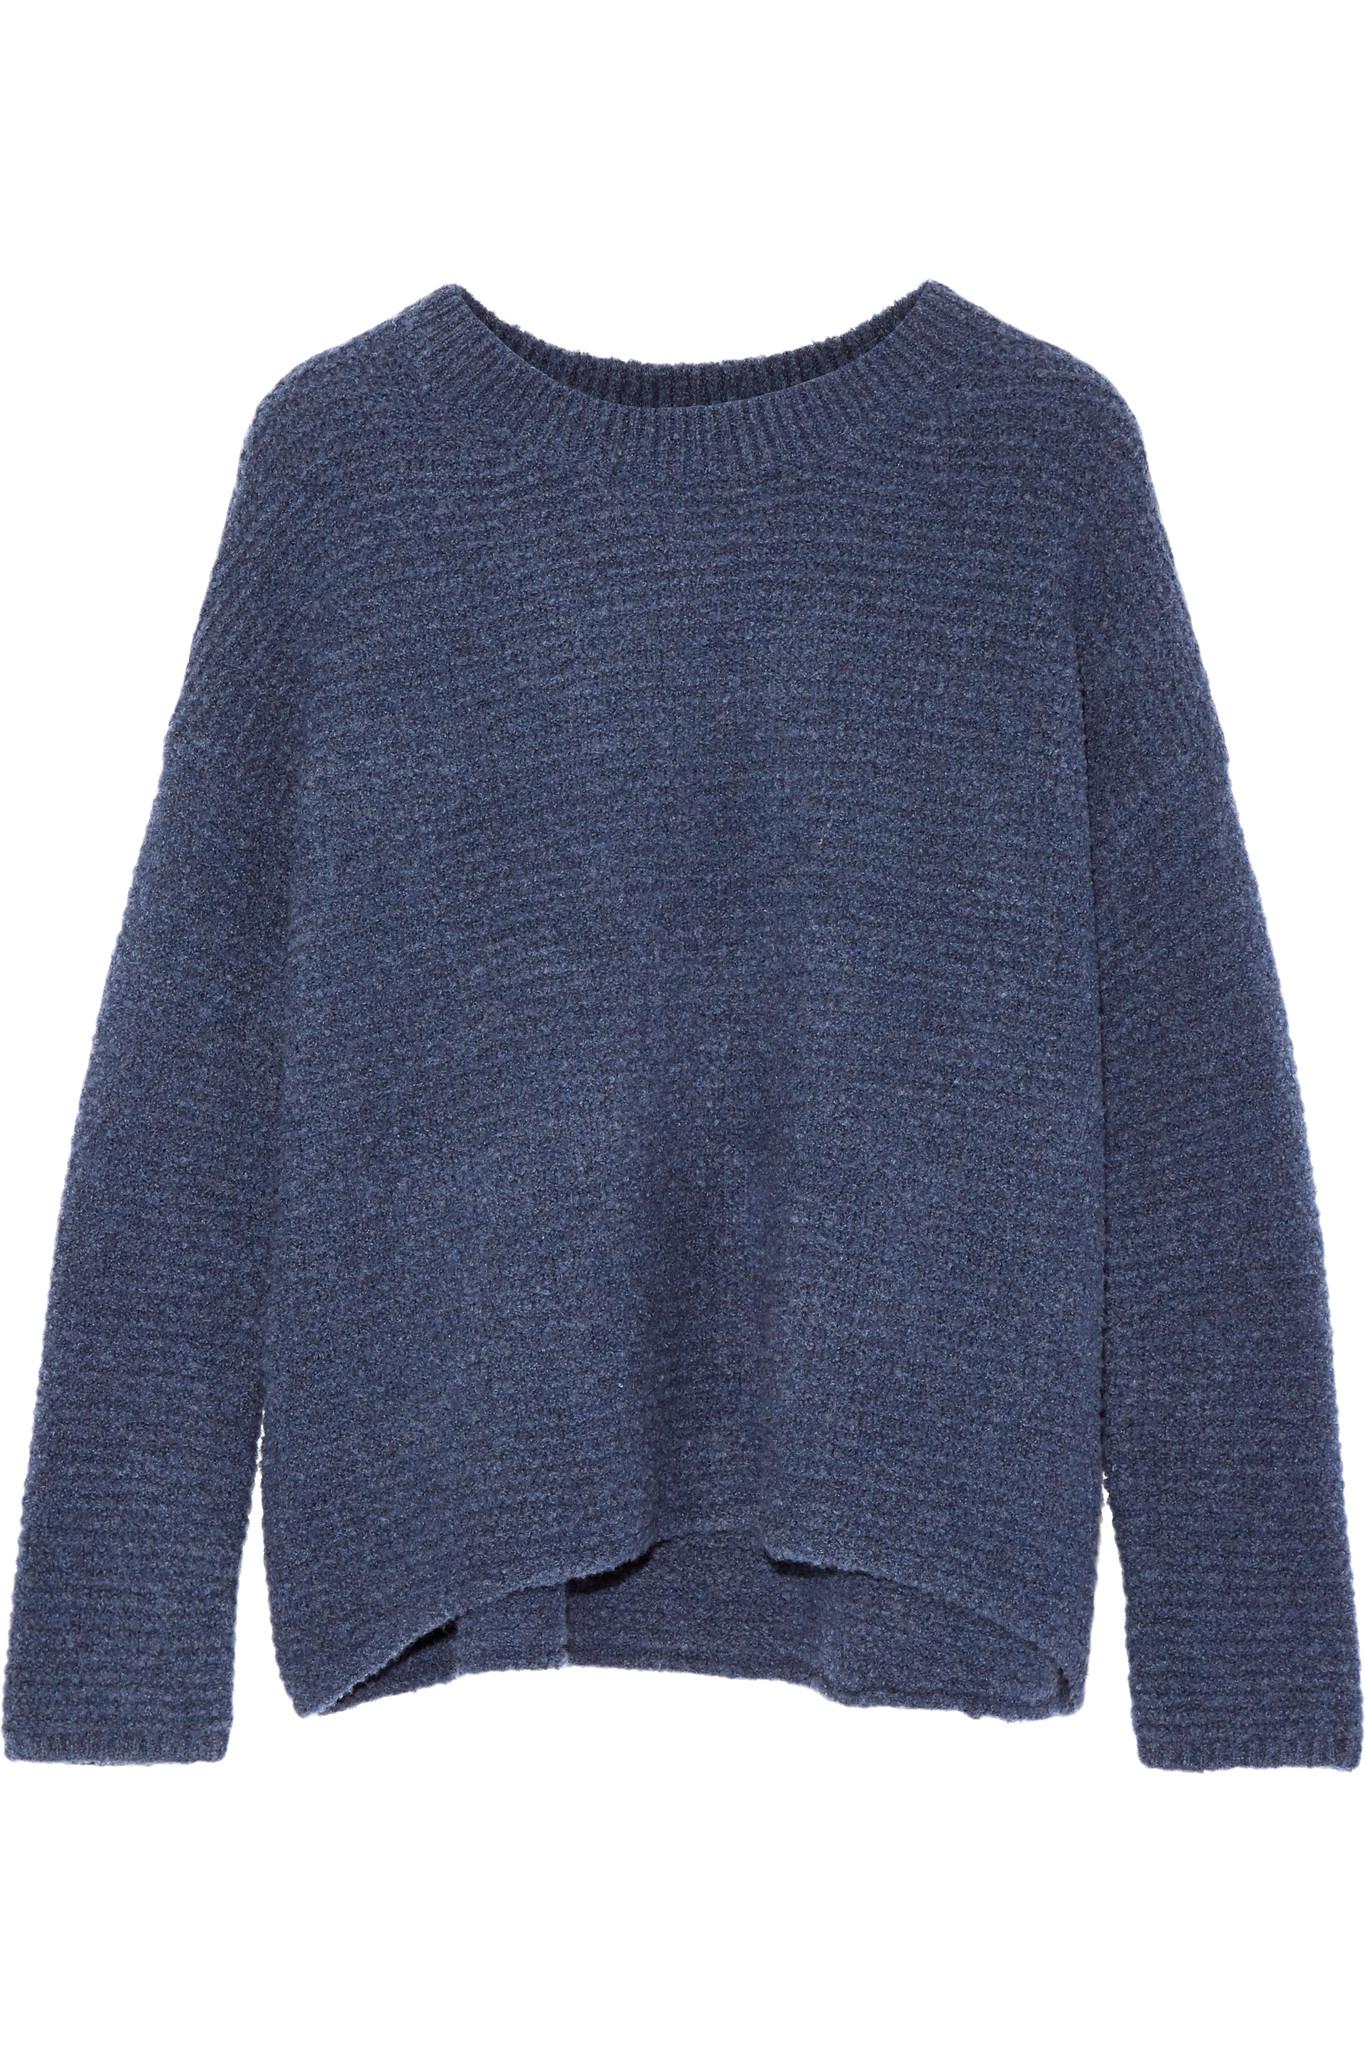 Lyst - Vince Wool And Cashmere-blend Sweater in Blue